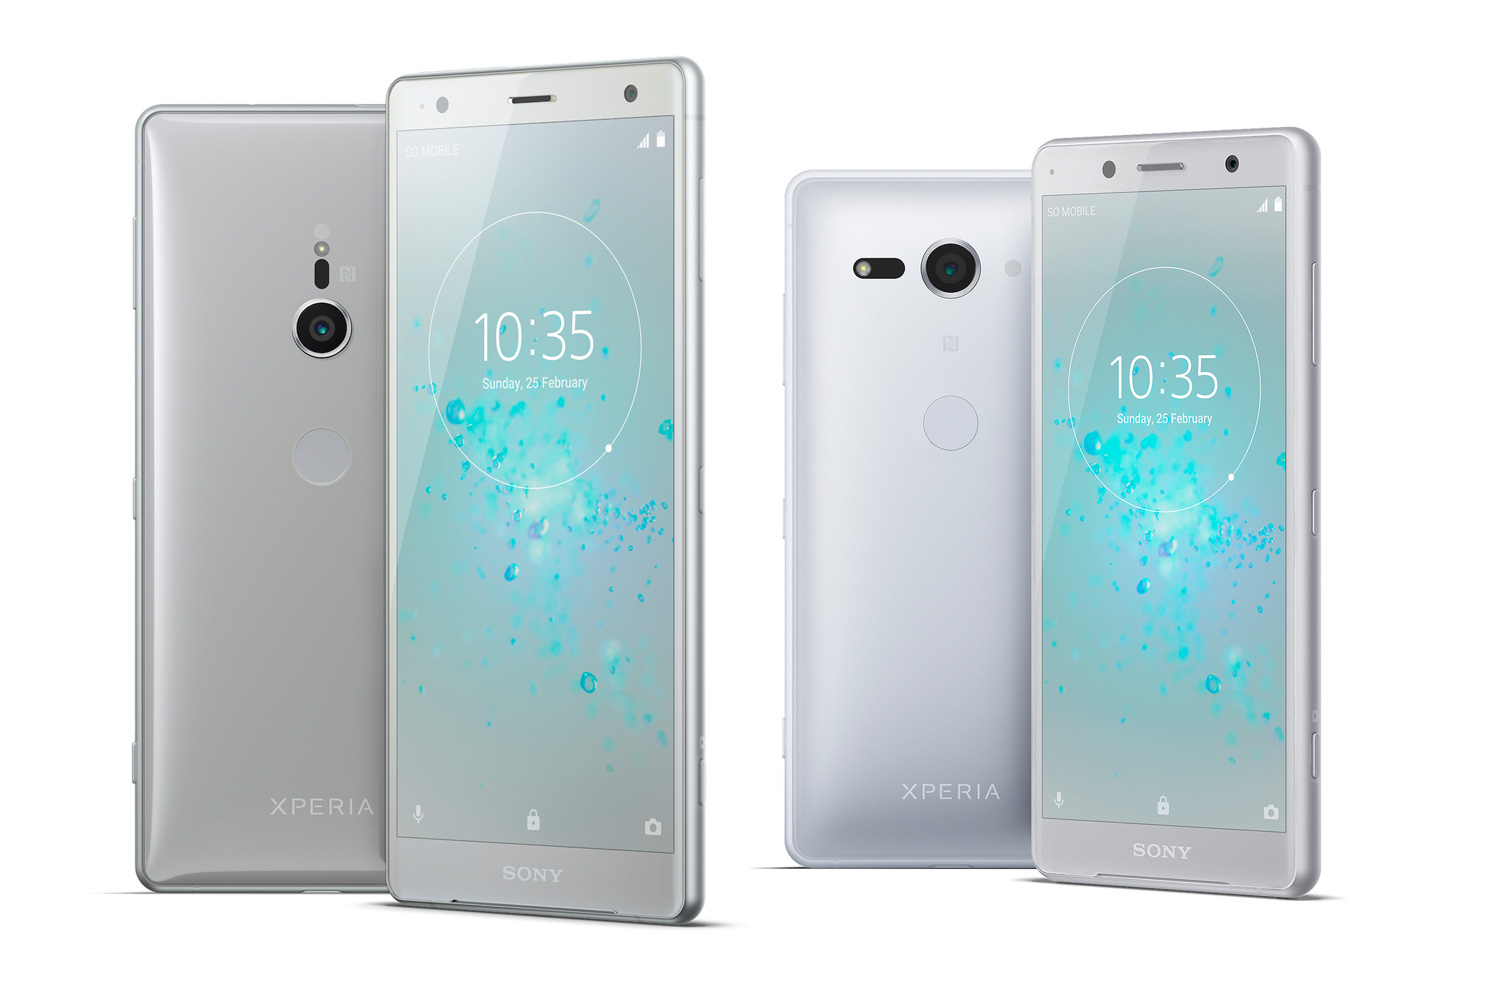 MWC 2018: Sony Xperia XZ2 and XZ2 Compact Officially Announced